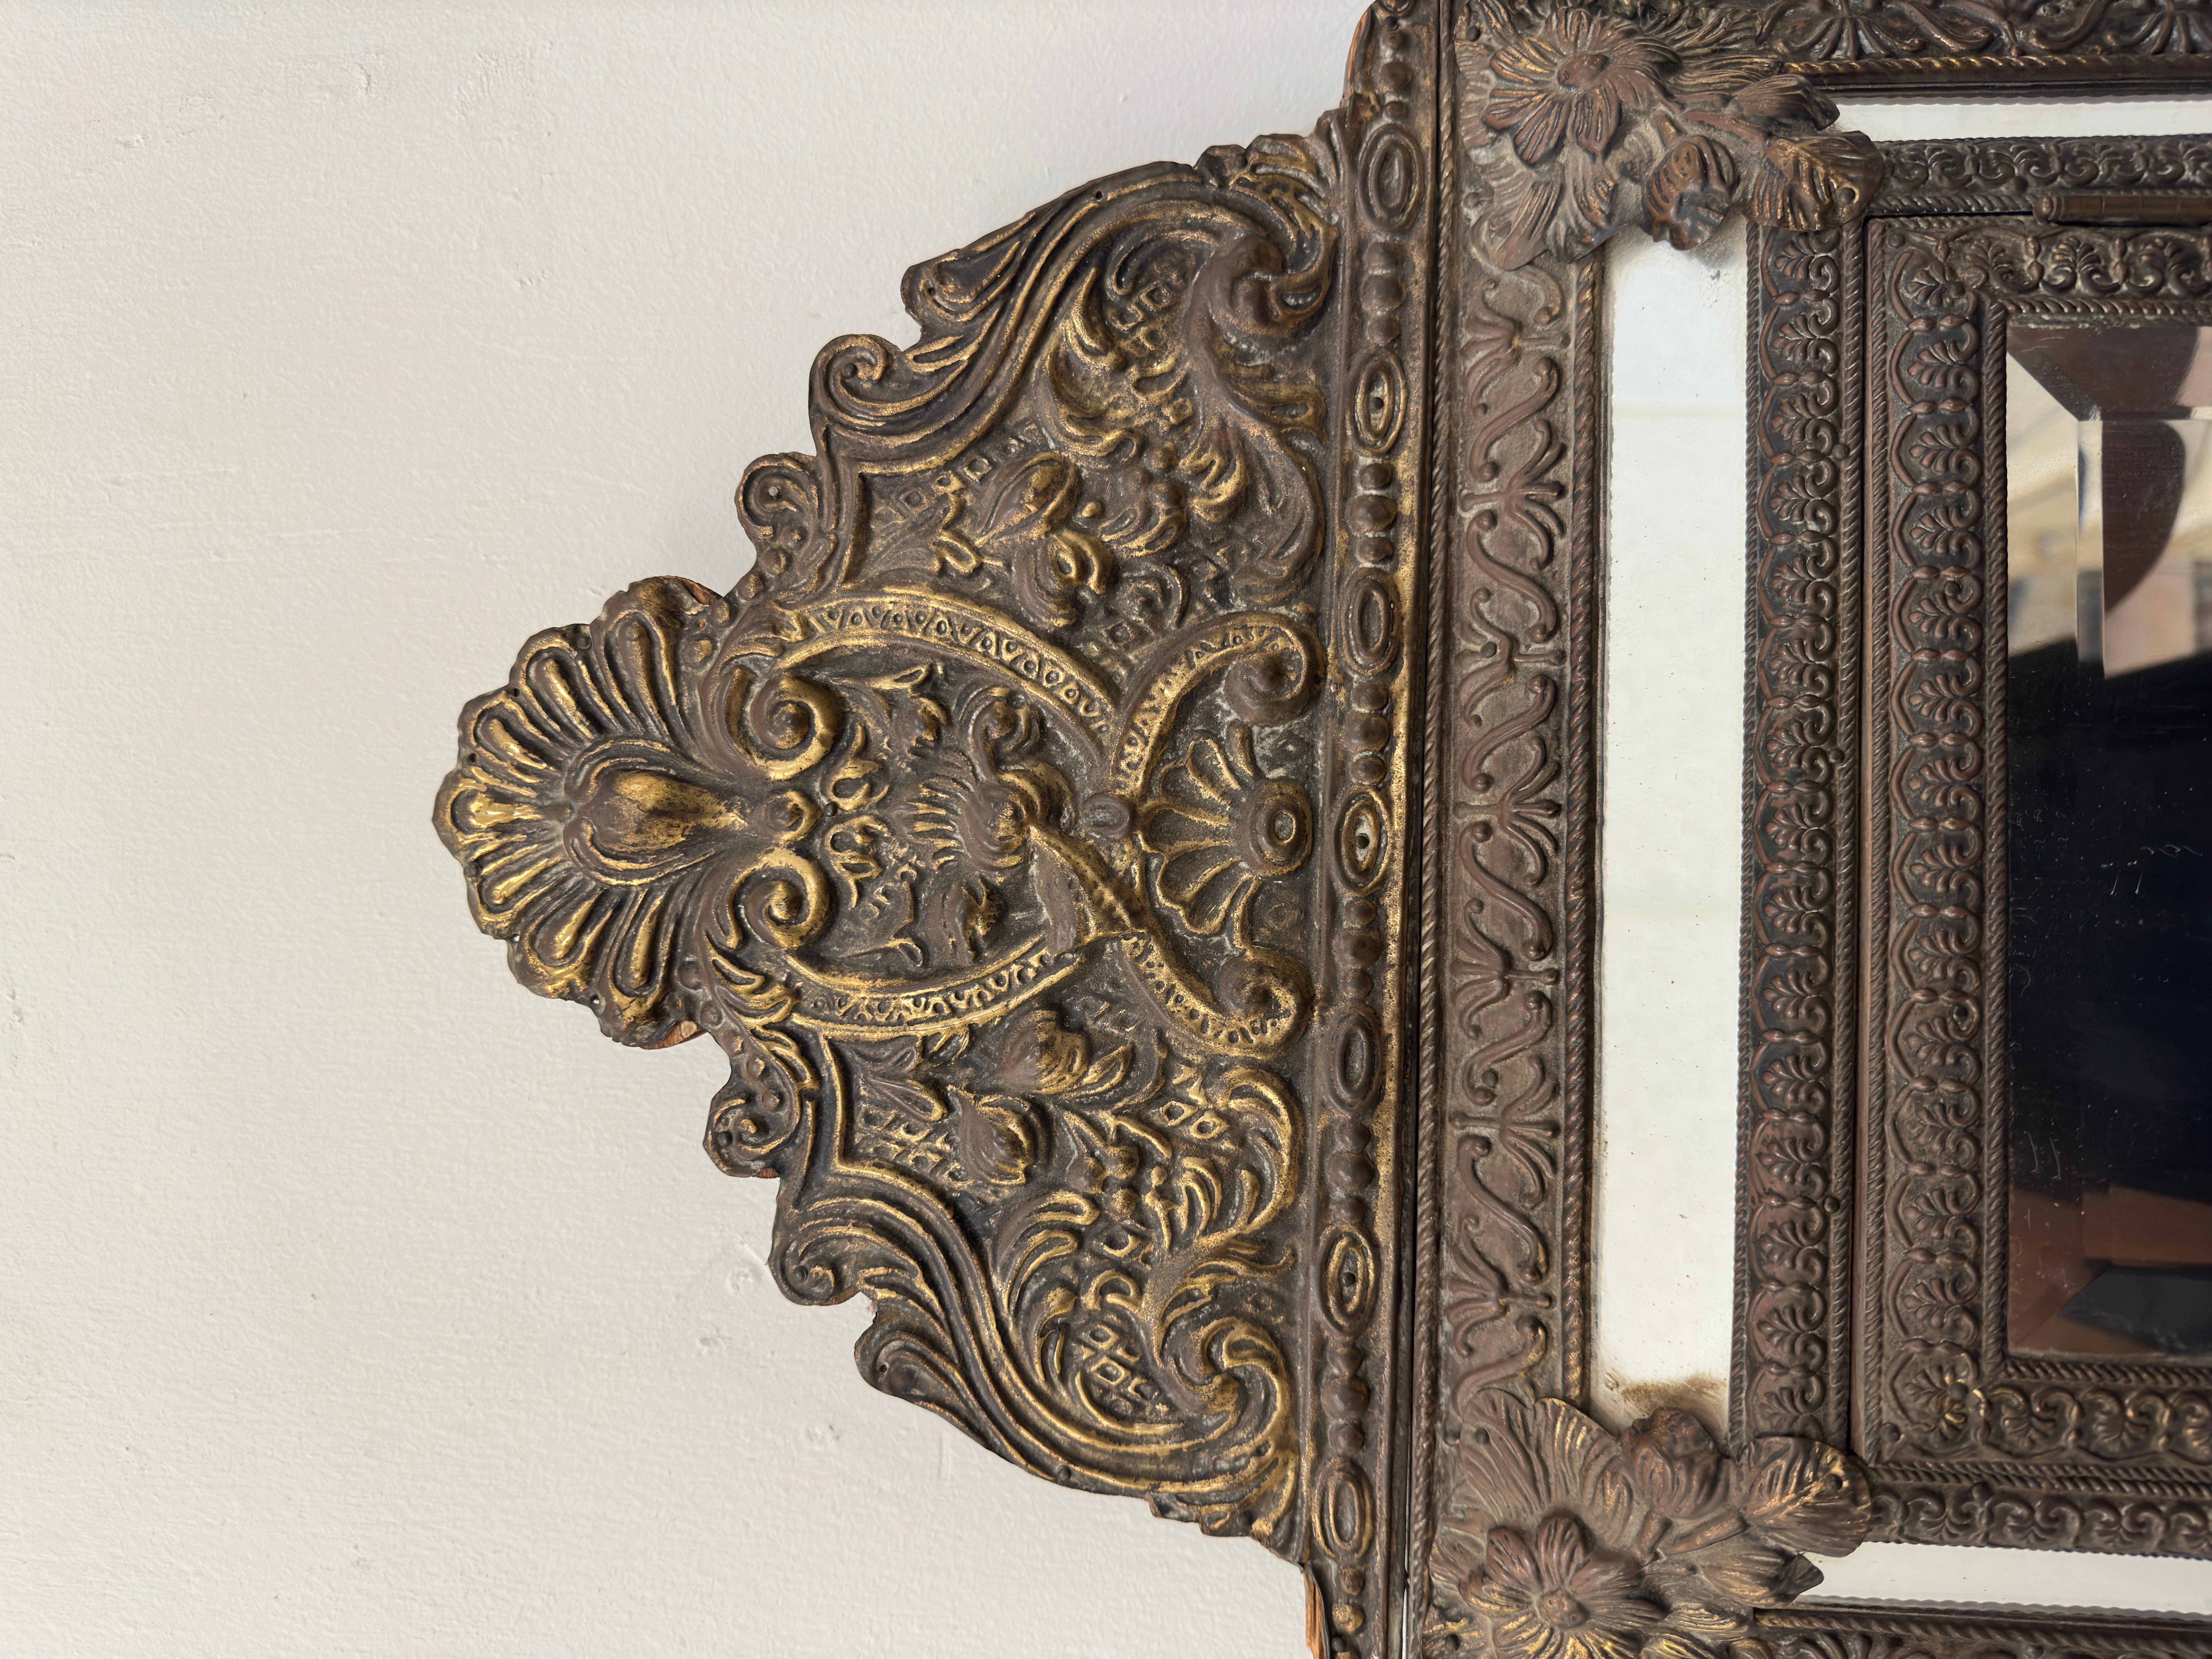 The Vintage Baroque Style Embossed Brass Mirror Cabinet is a stunning piece of furniture that exudes opulence and elegance. Crafted in the ornate Baroque style, the cabinet features intricate embossed brass detailing that adds a touch of grandeur to